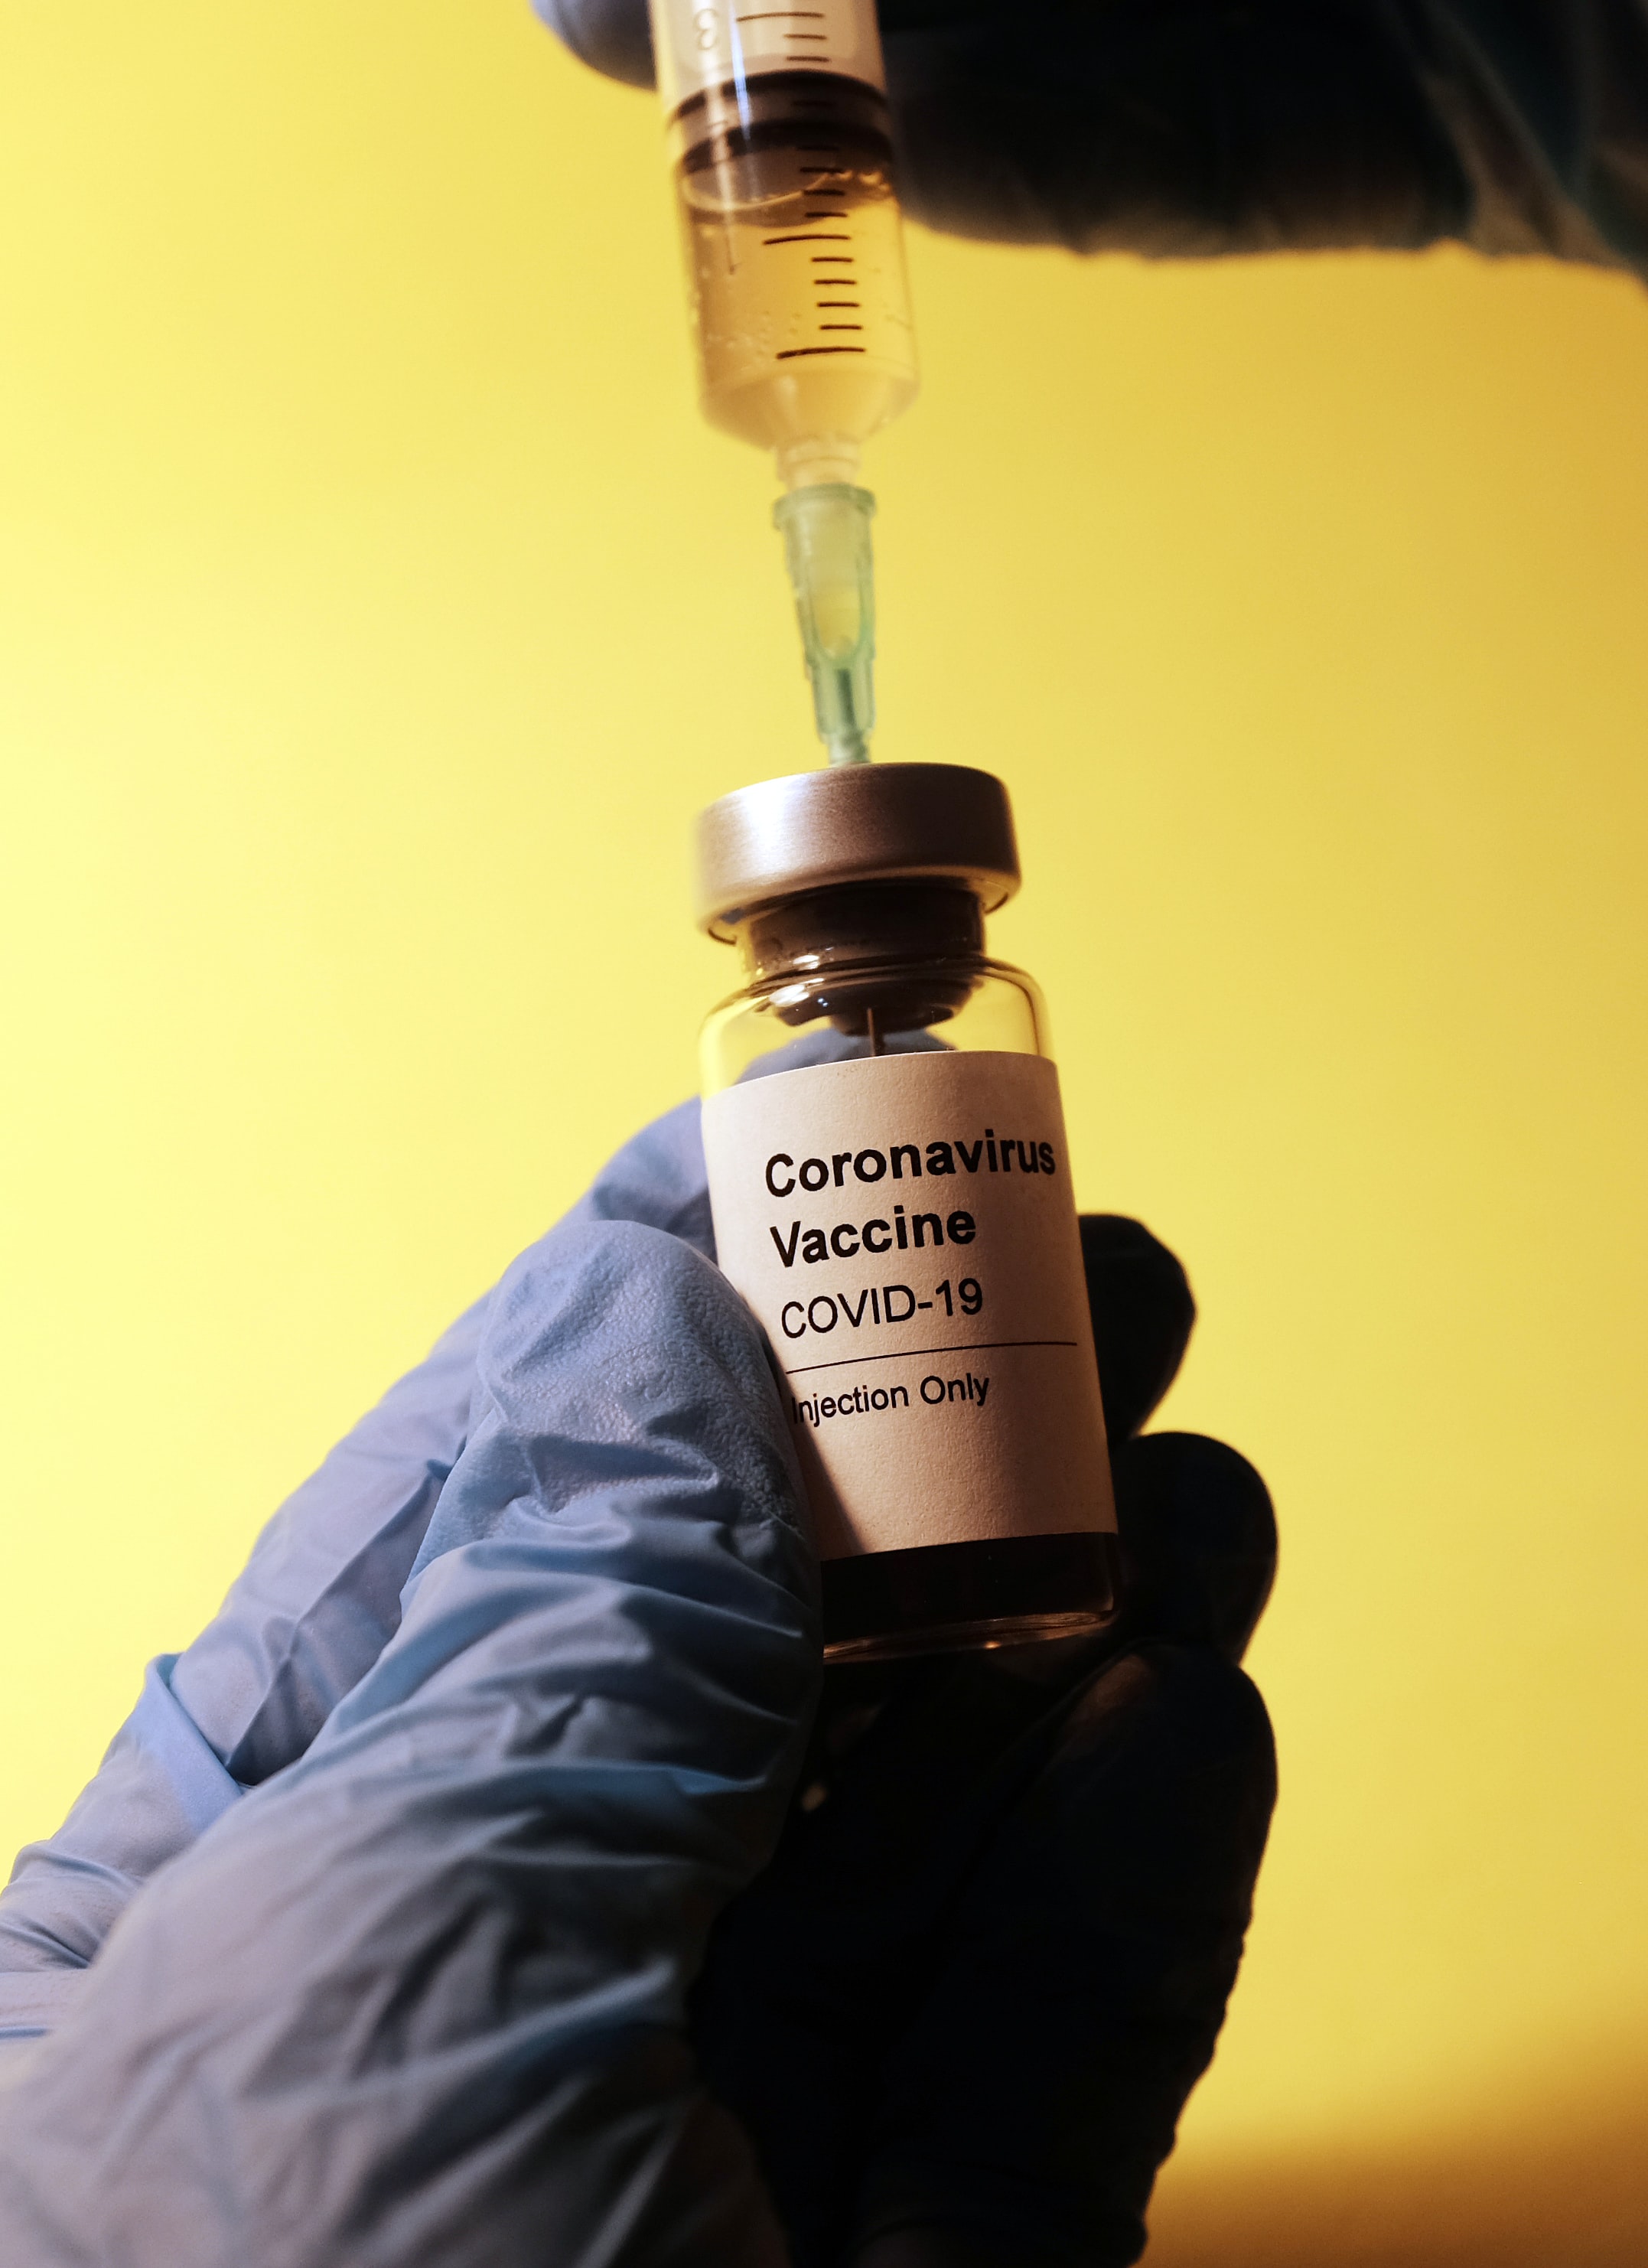 covid-19 vaccine in doctor's hand